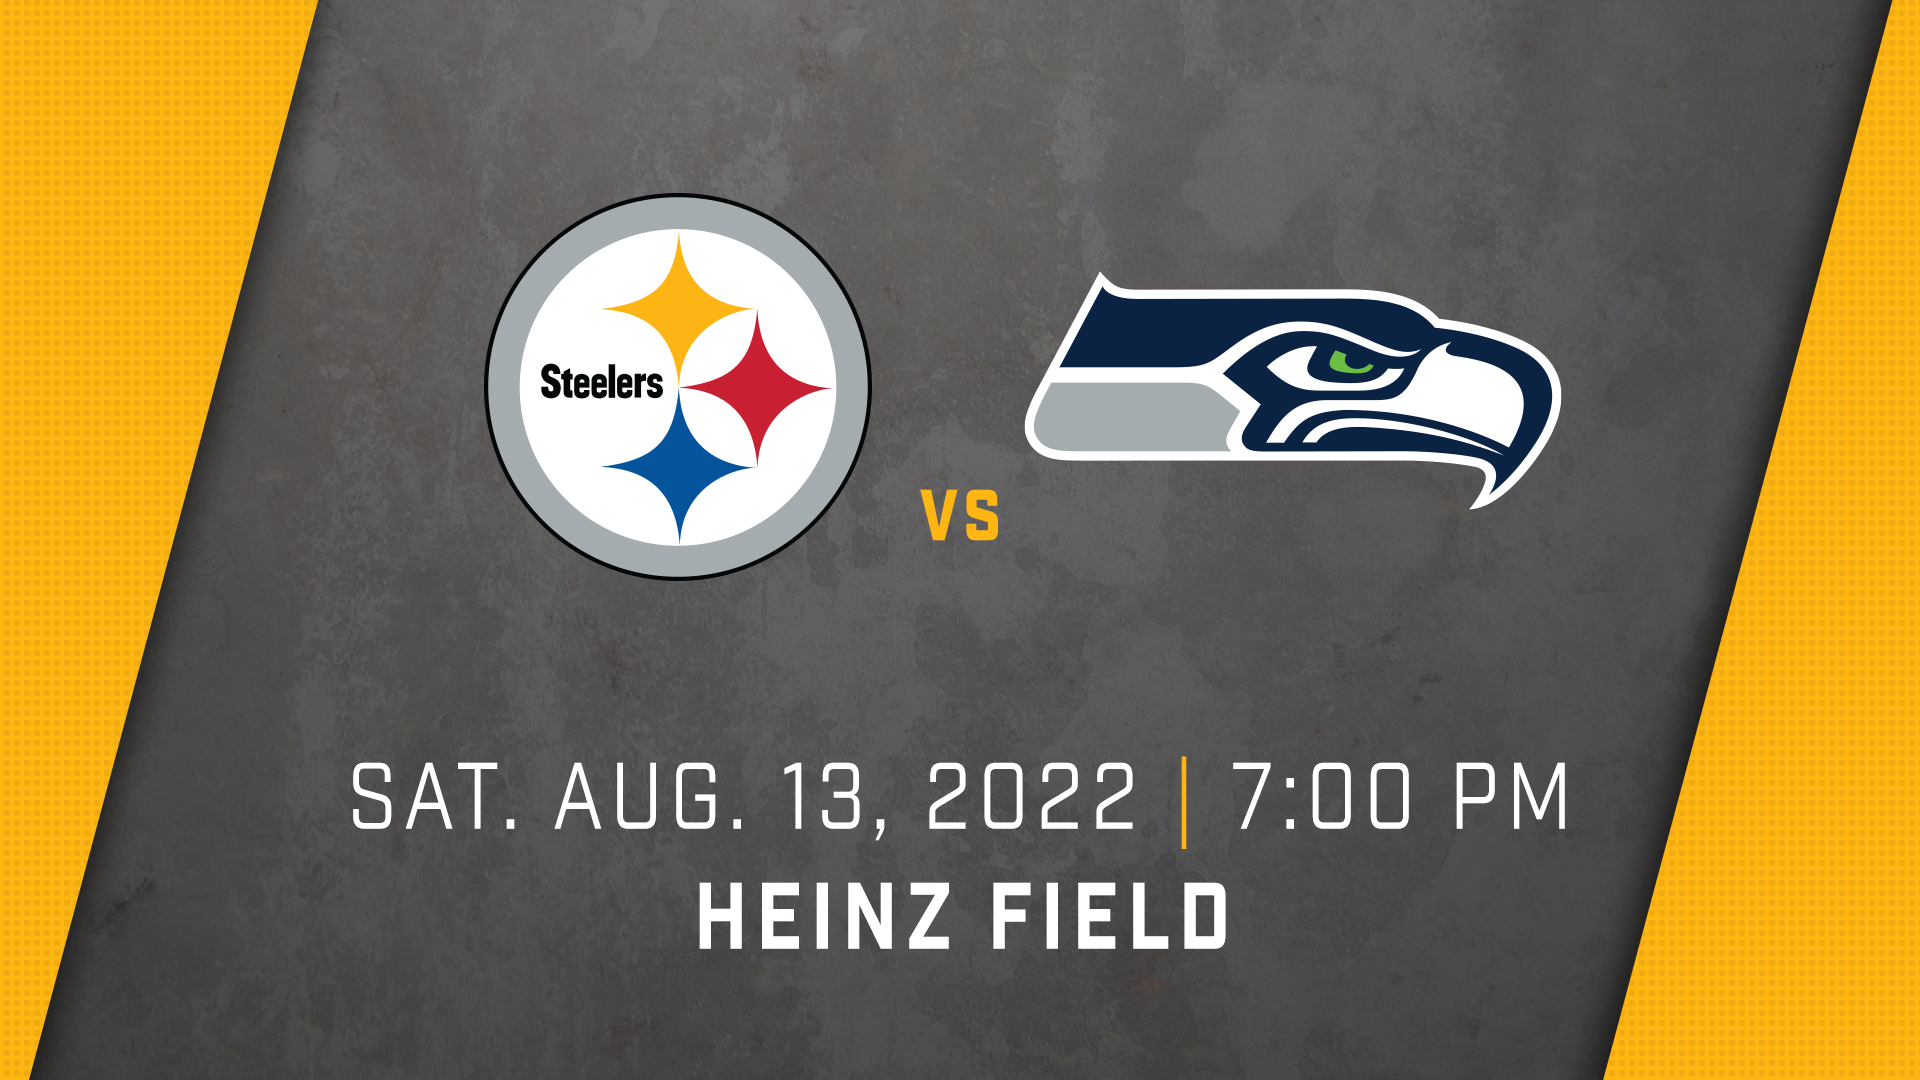 Steelers vs. Seahawks matchup graphic